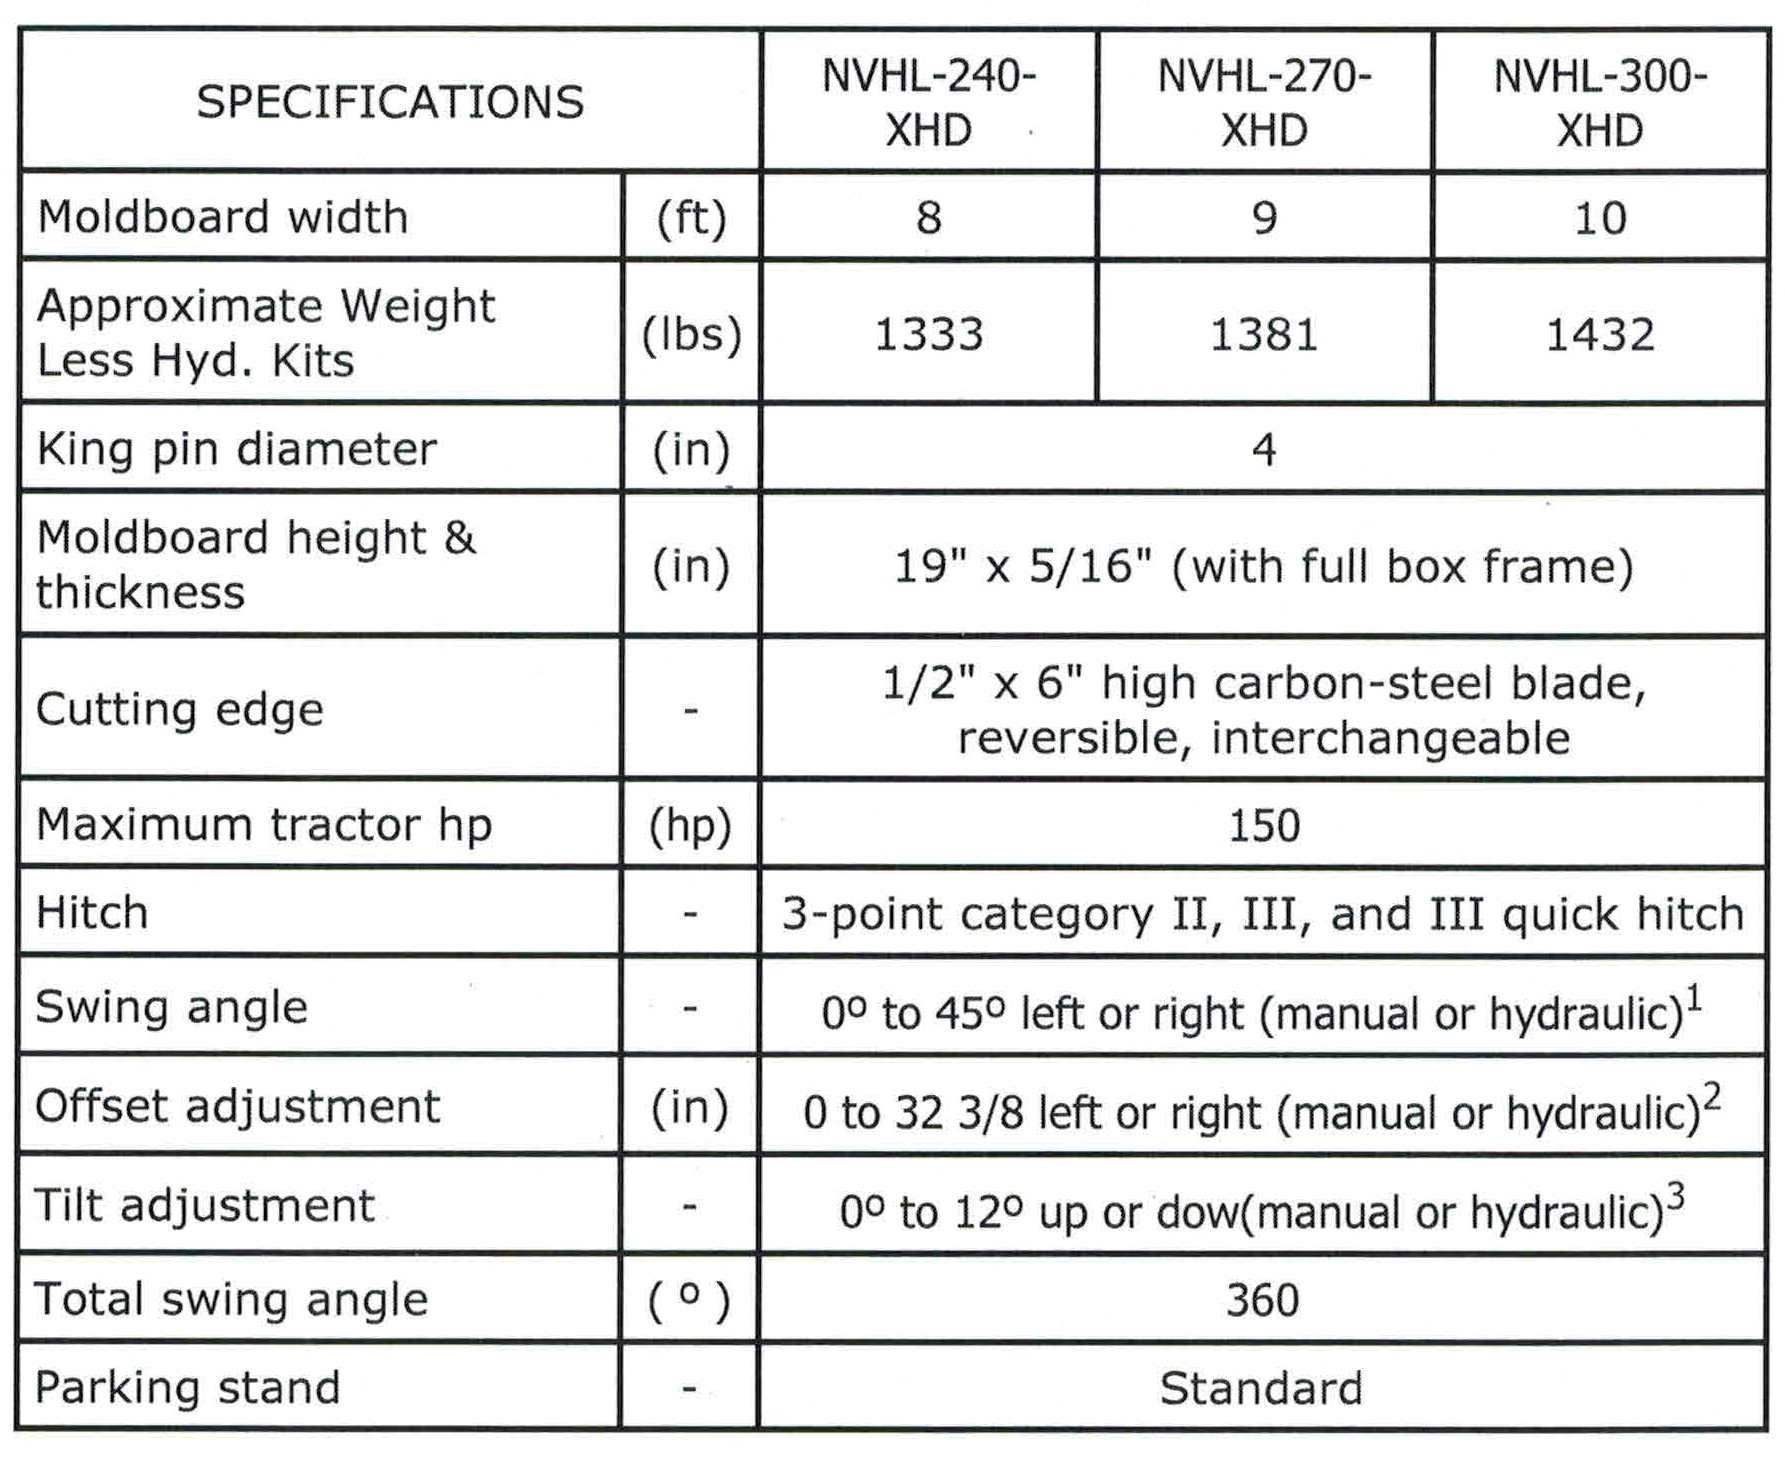 Specifications NVHL-XHD Series Tractor Blades